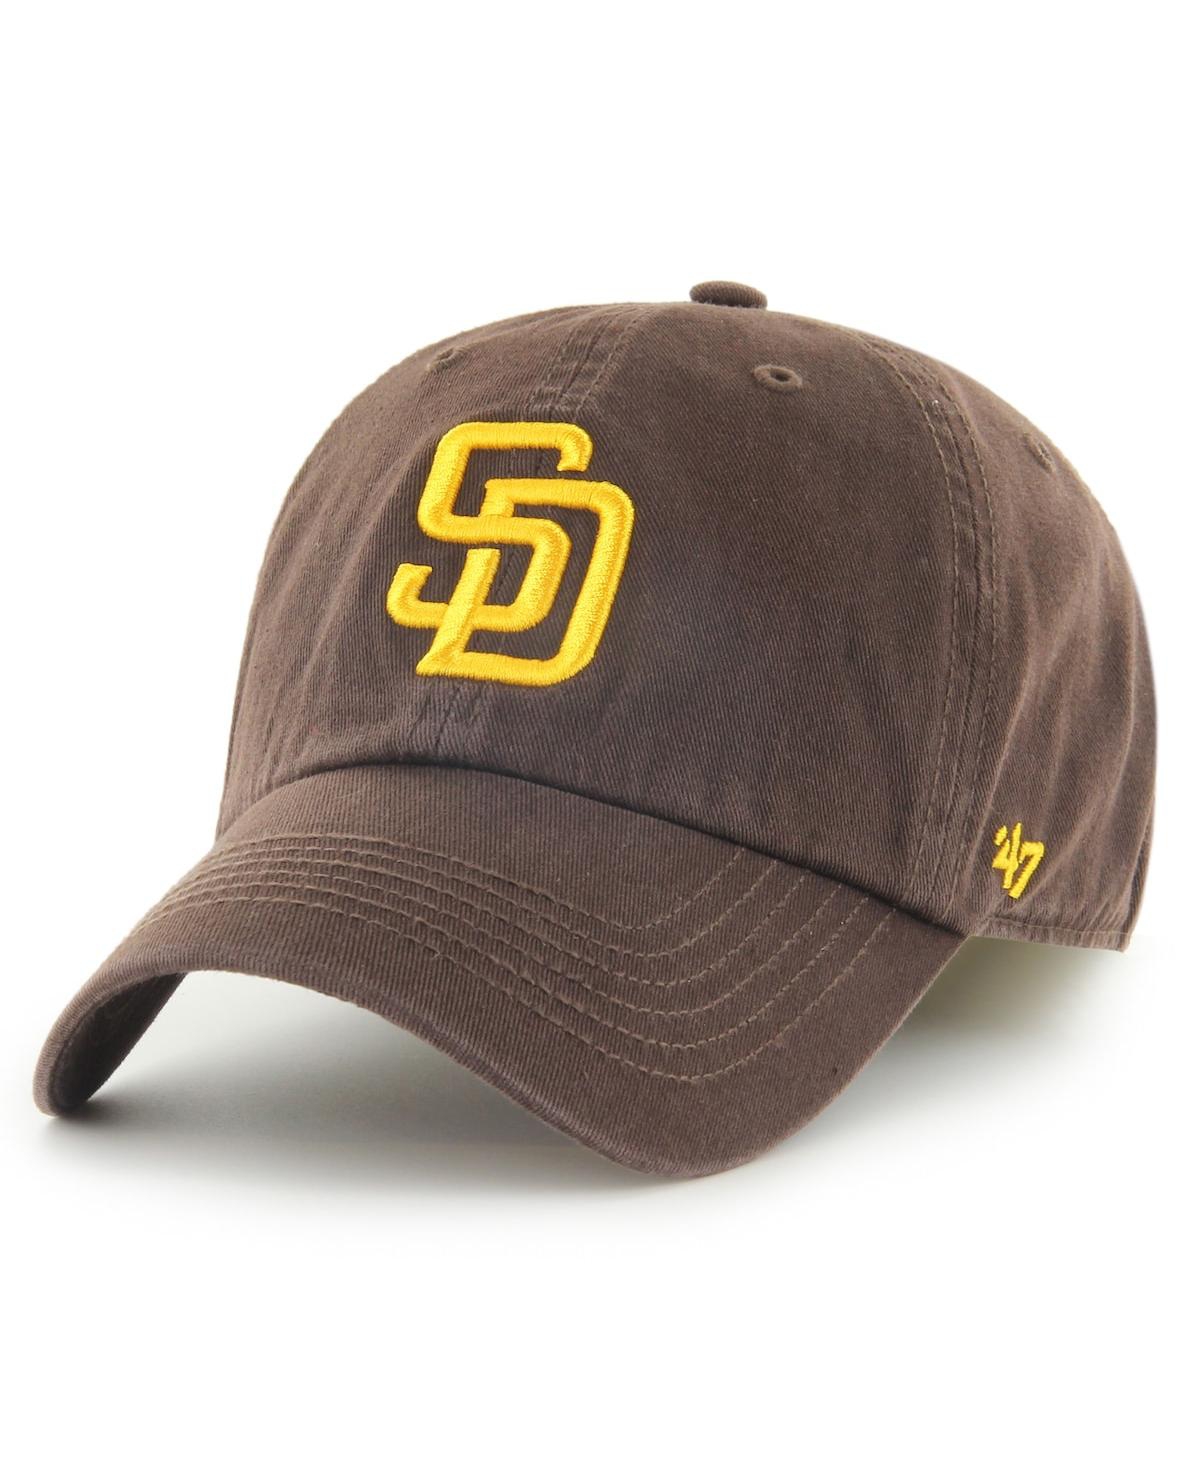 Men's '47 Brand Brown San Diego Padres Franchise Logo Fitted Hat - Brown